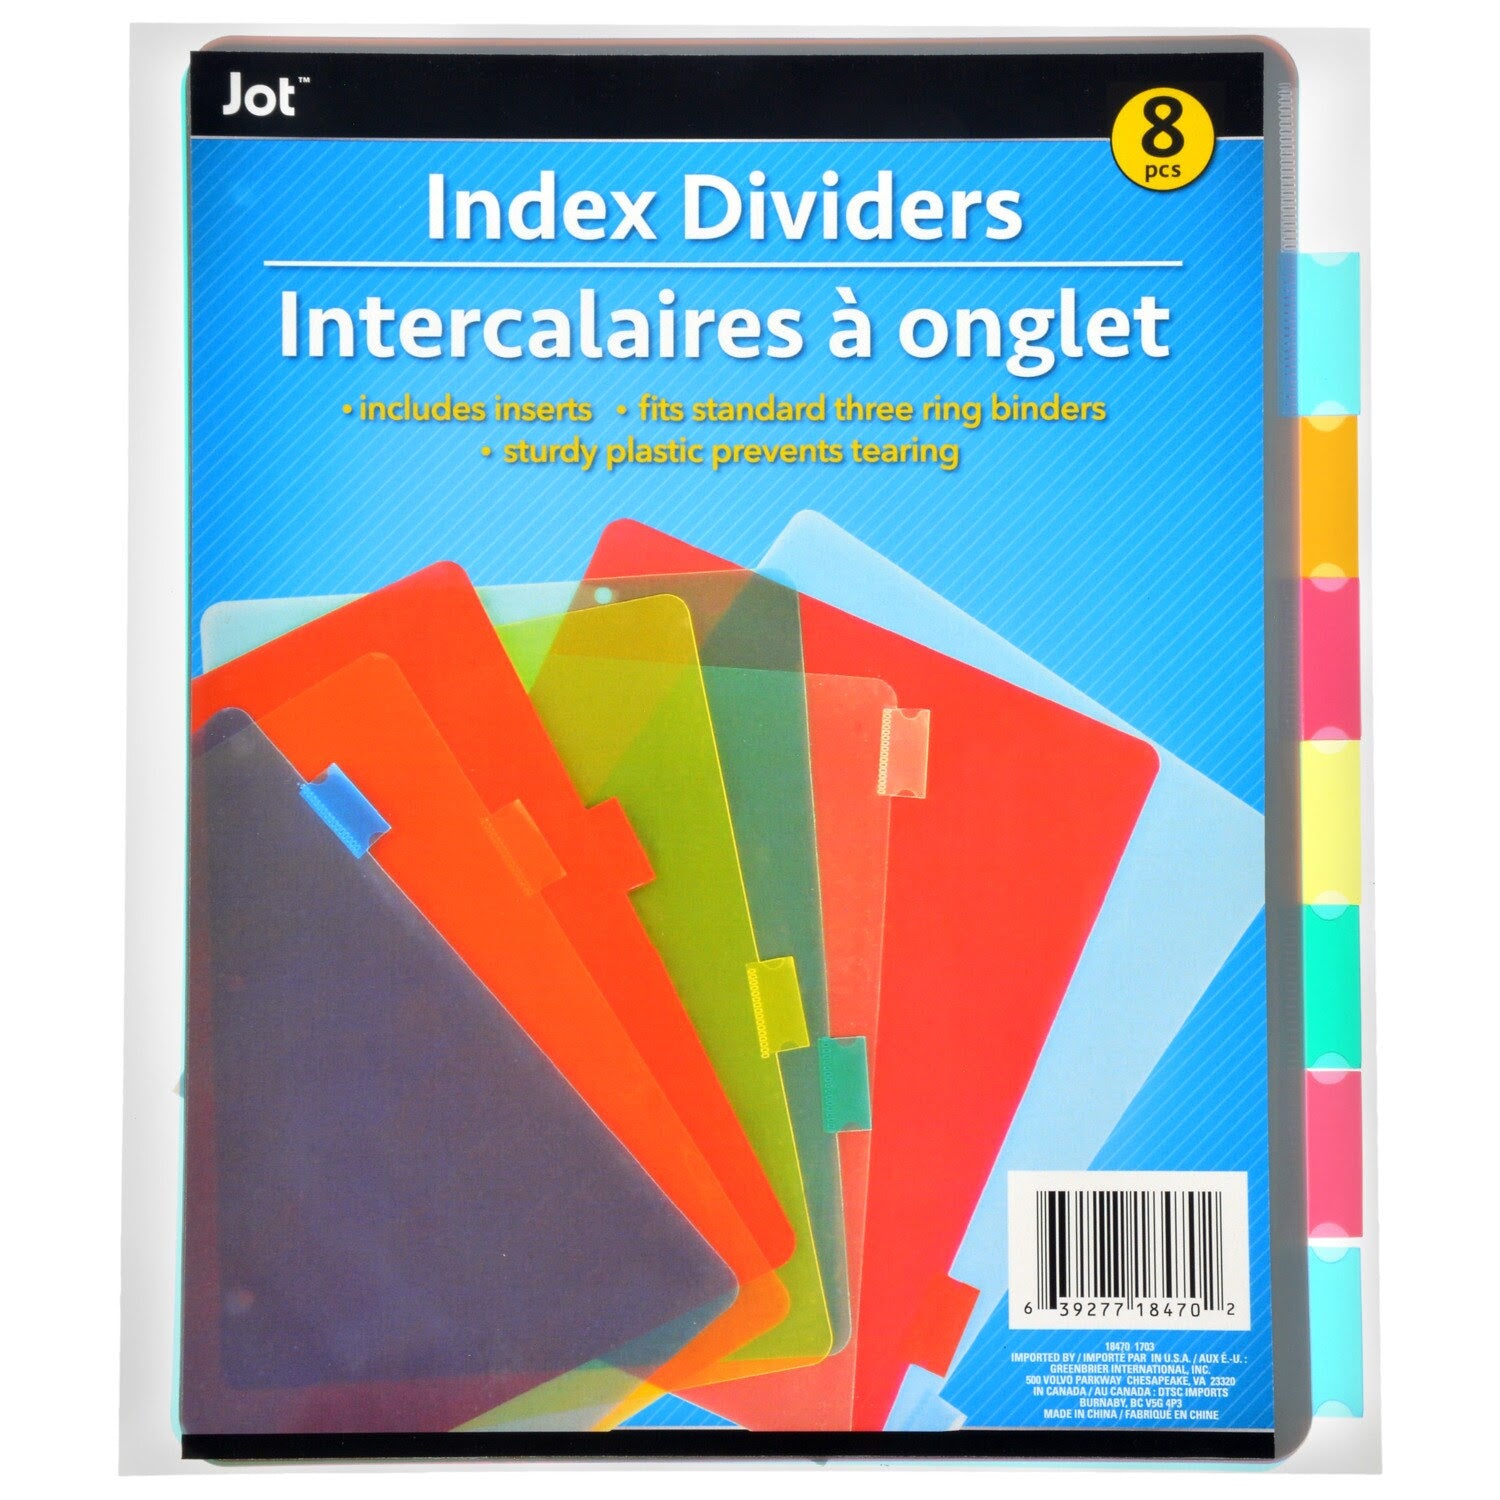 Dividers (1-8)